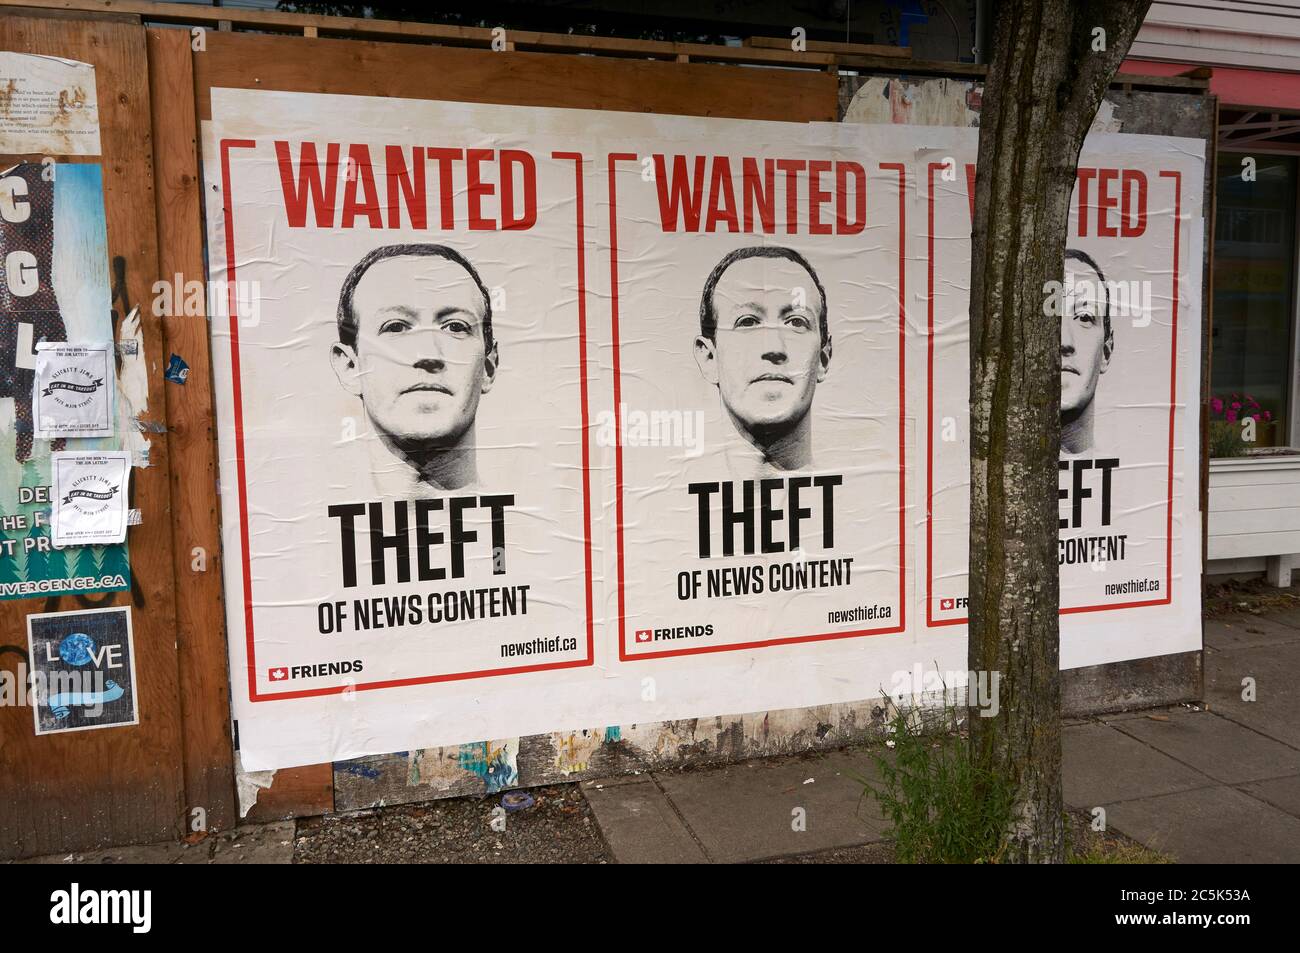 Wanted posters for Mark Zuckerberg, co-founder of Facebook, on Main Street, Vancouver, BC, Canada Stock Photo